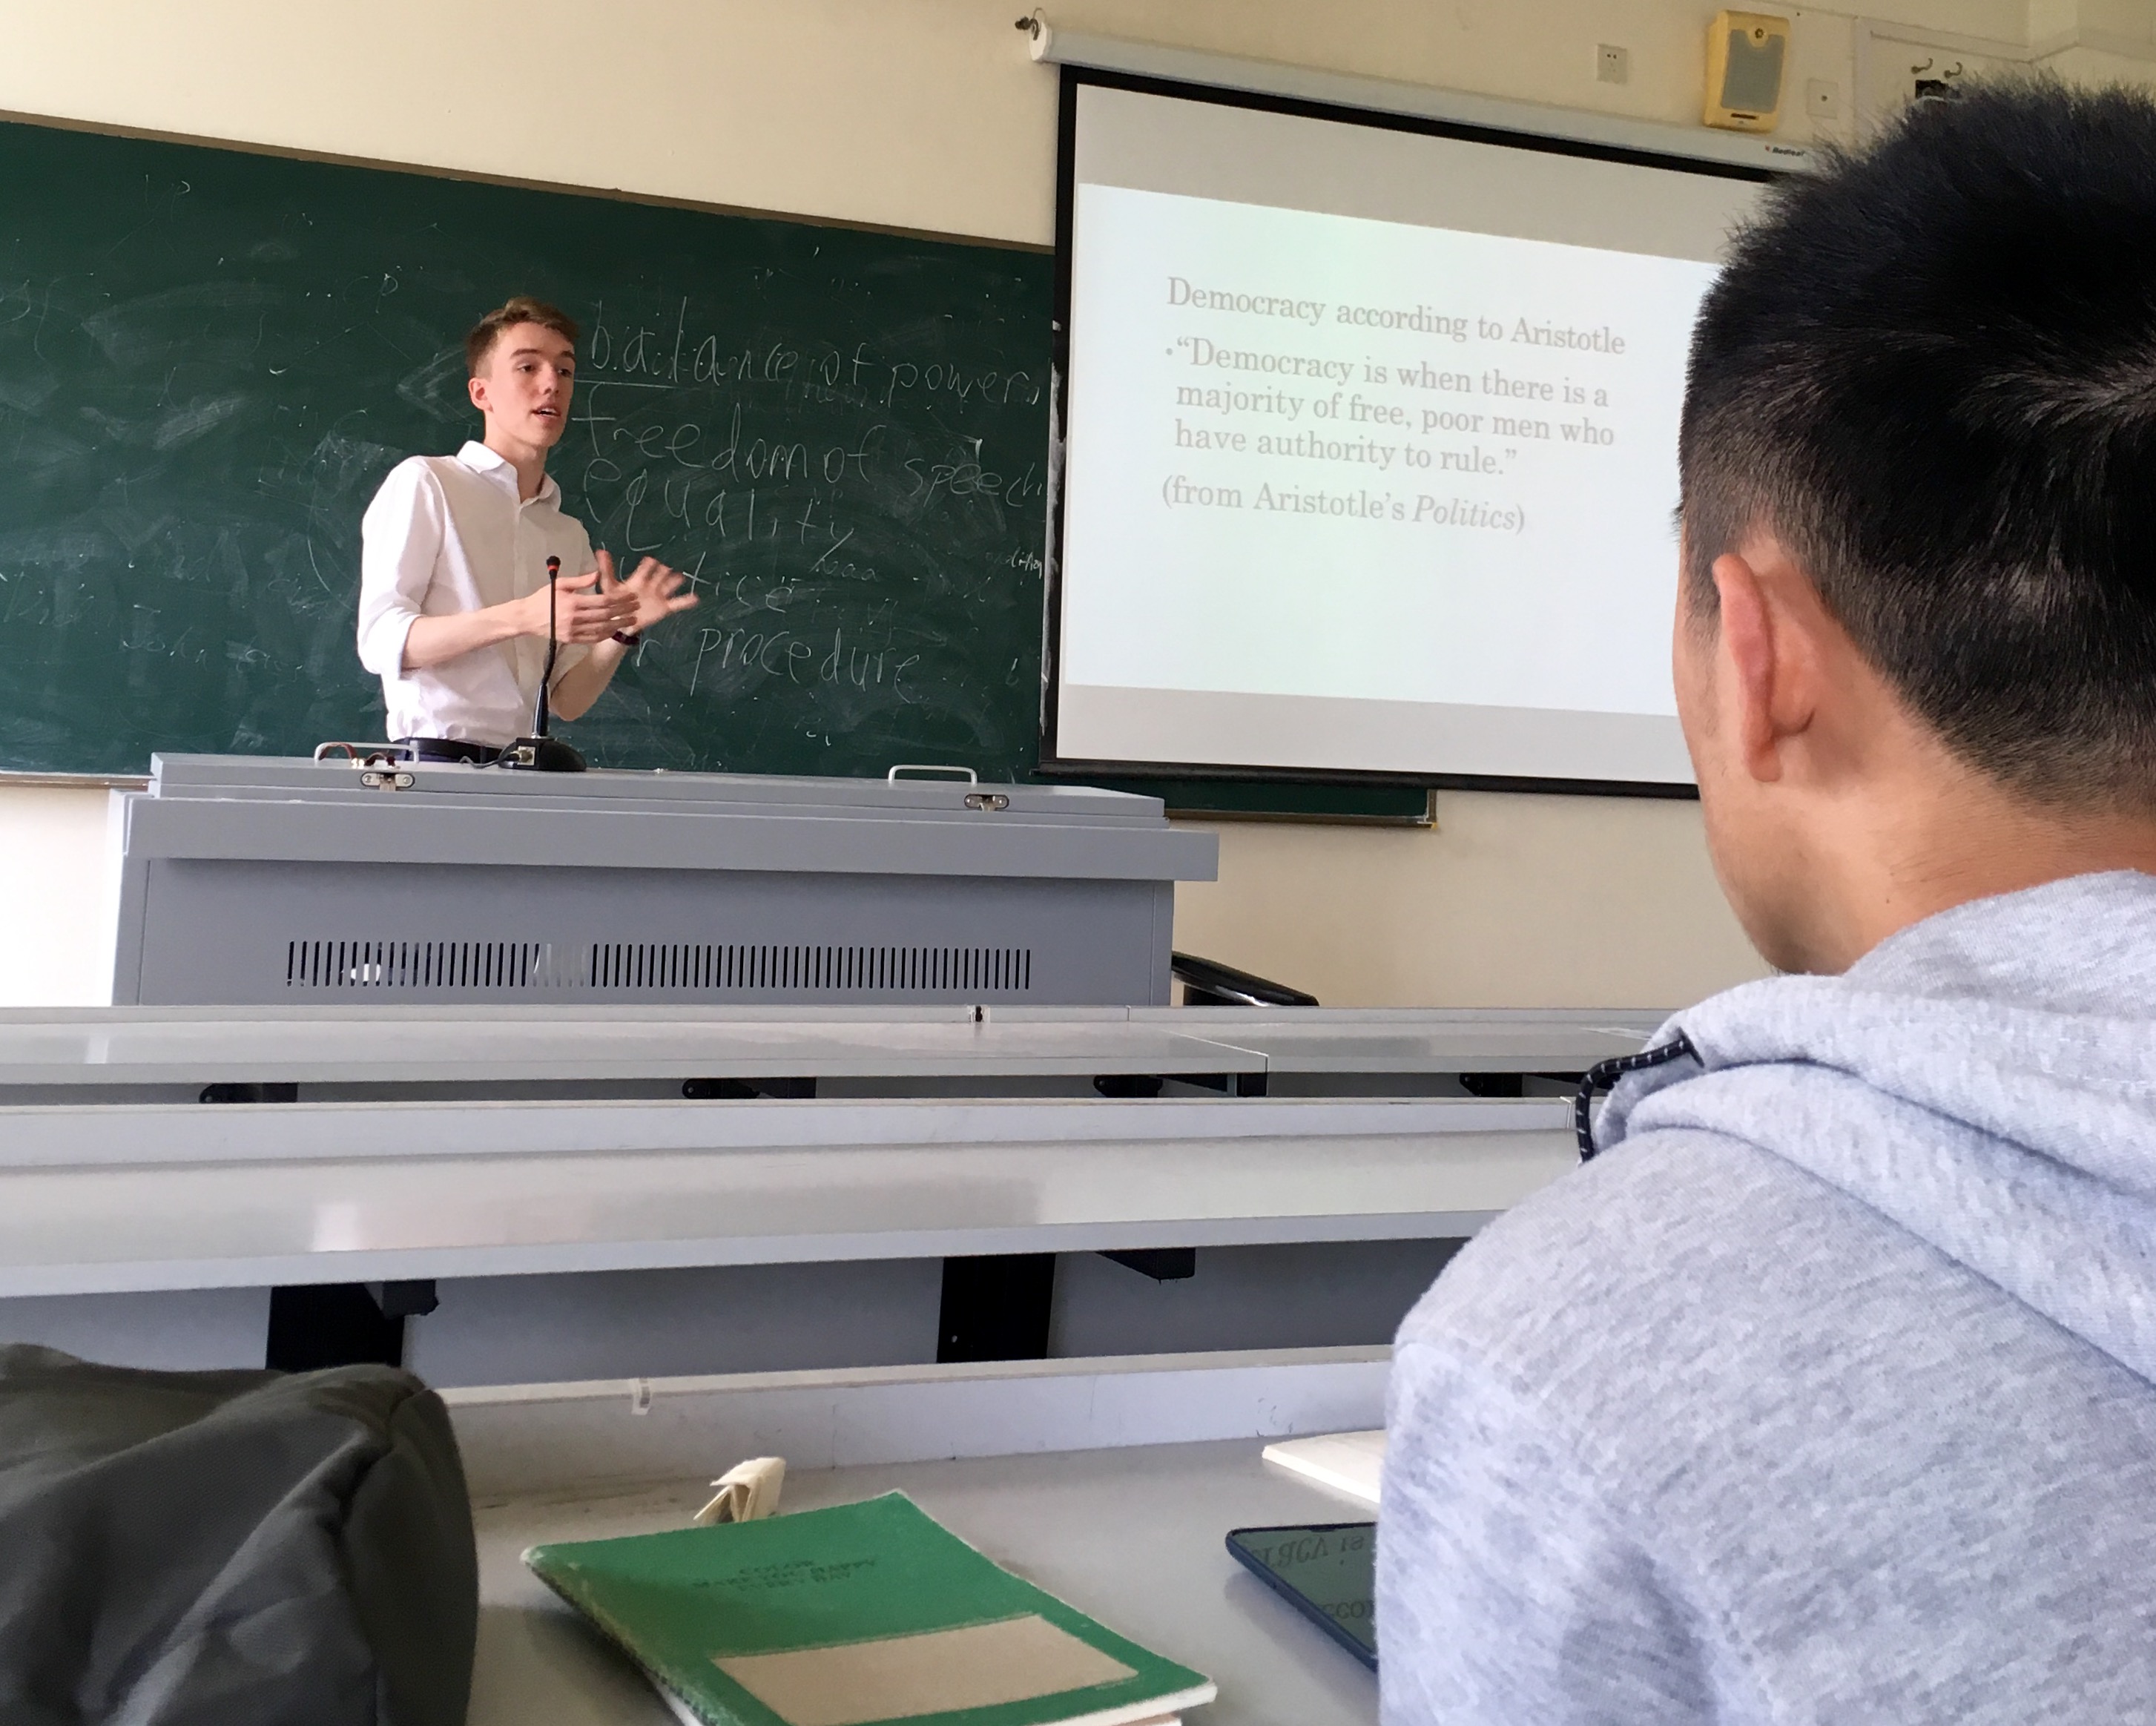 Male TKC Student giving a presentation in China